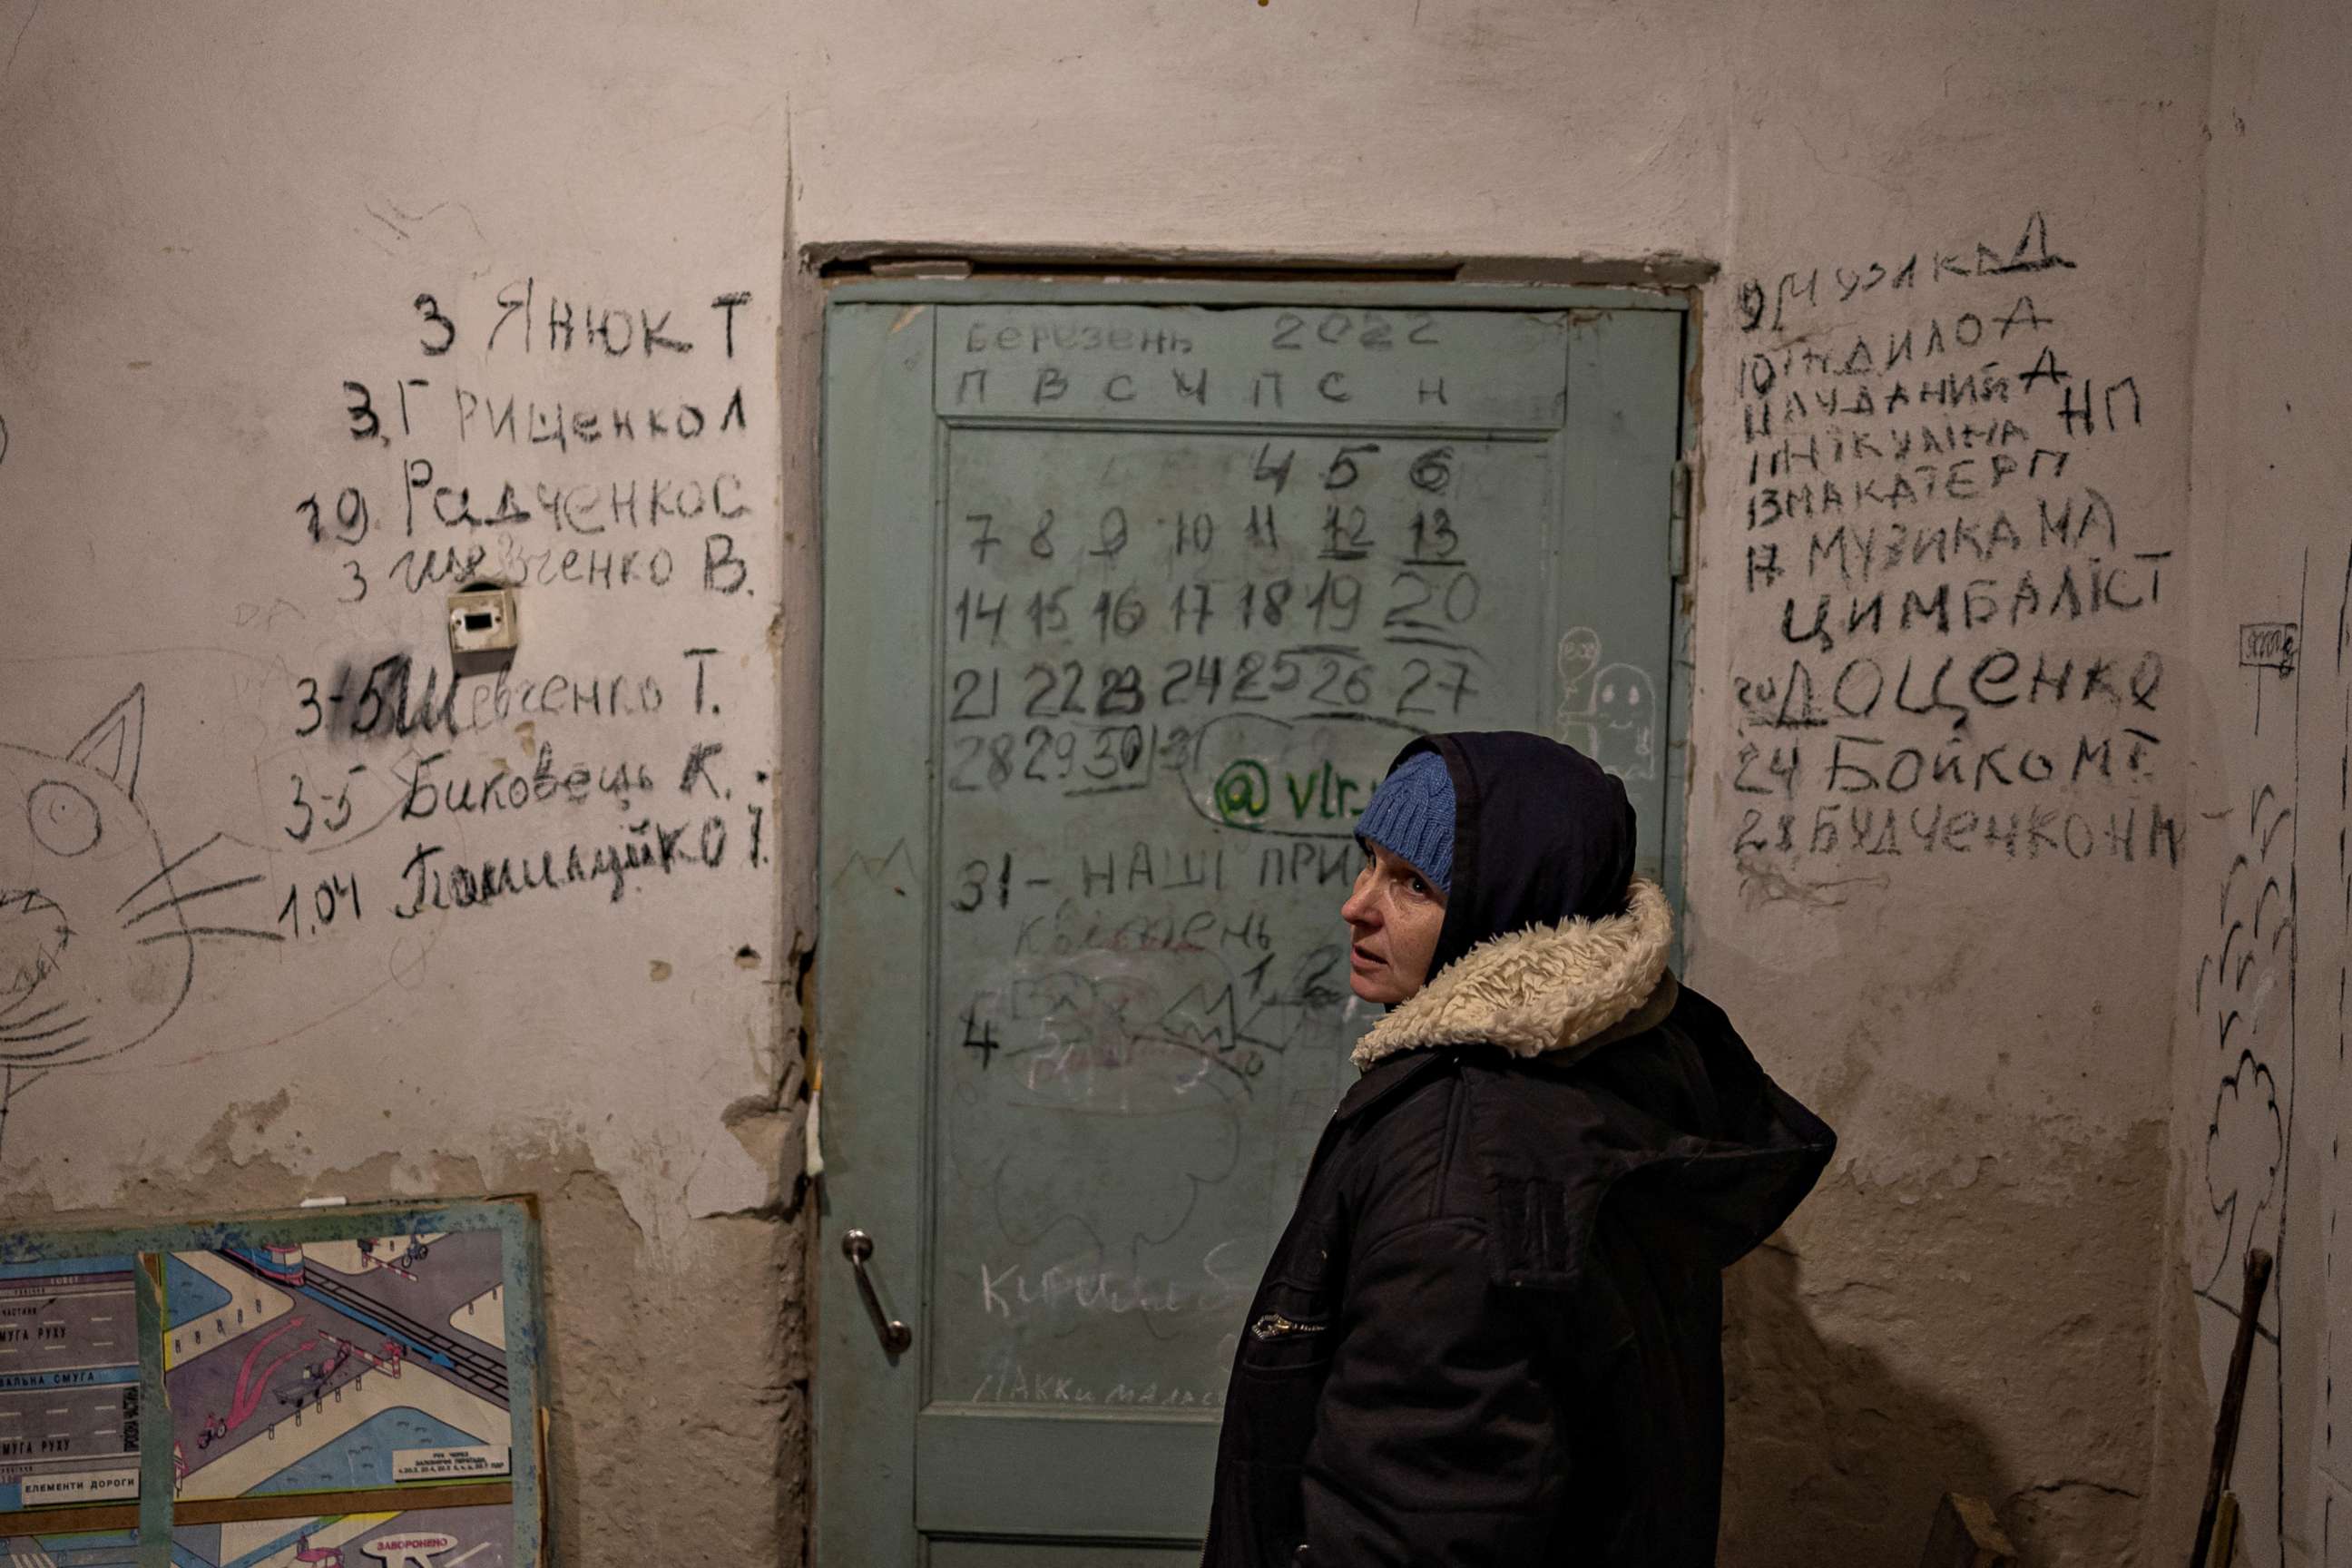 PHOTO: Halyna Tolochina stands in front of a wall inscribed with the names of people who died inside the school basement in Yahidne.